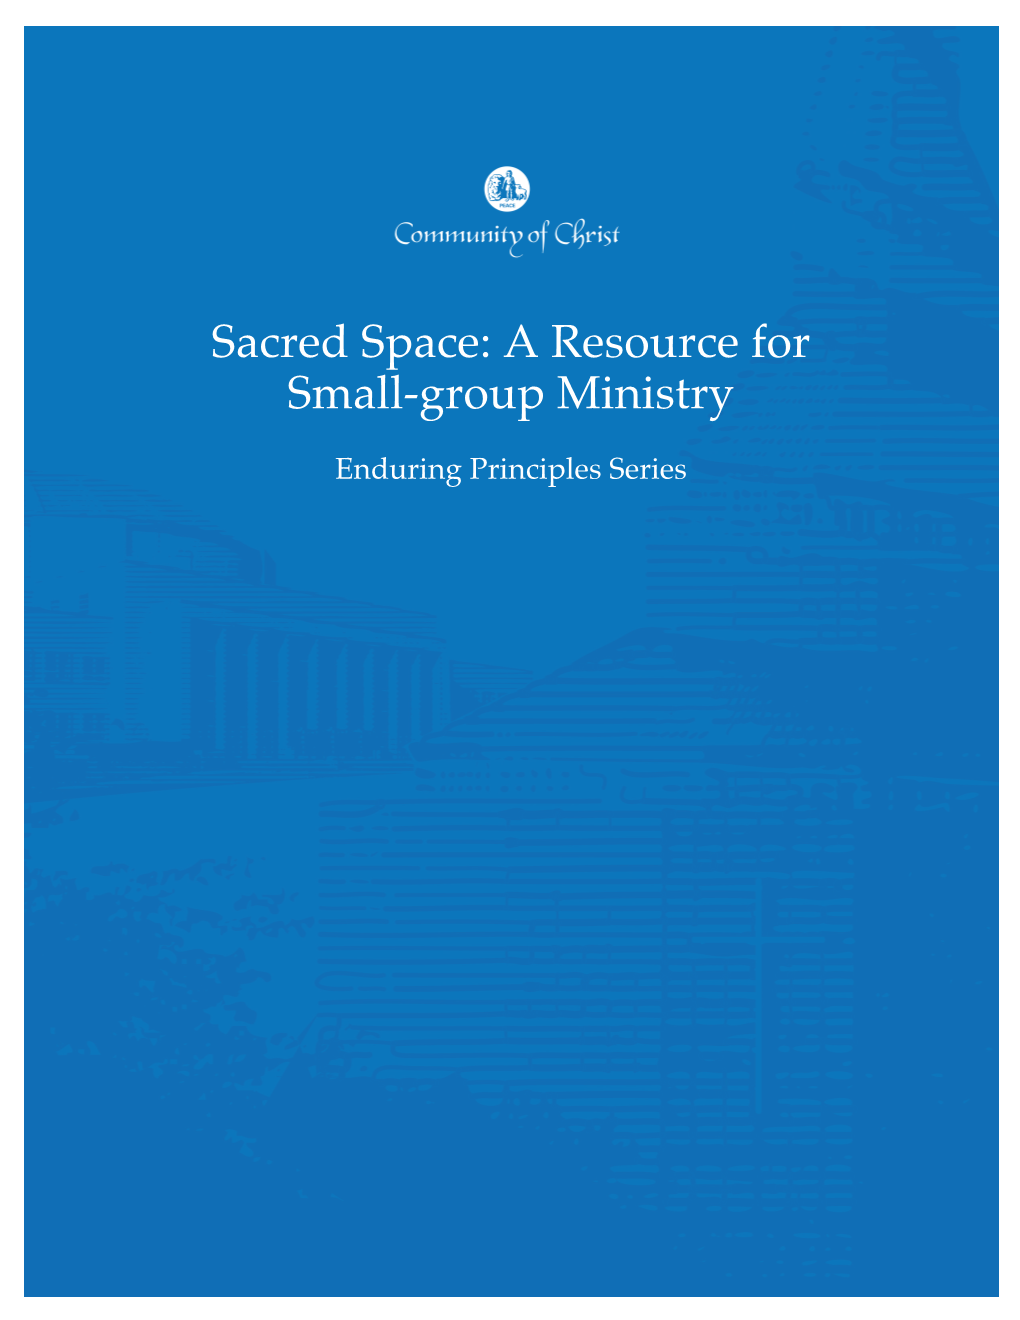 Sacred Space: a Resource for Small-Group Ministry